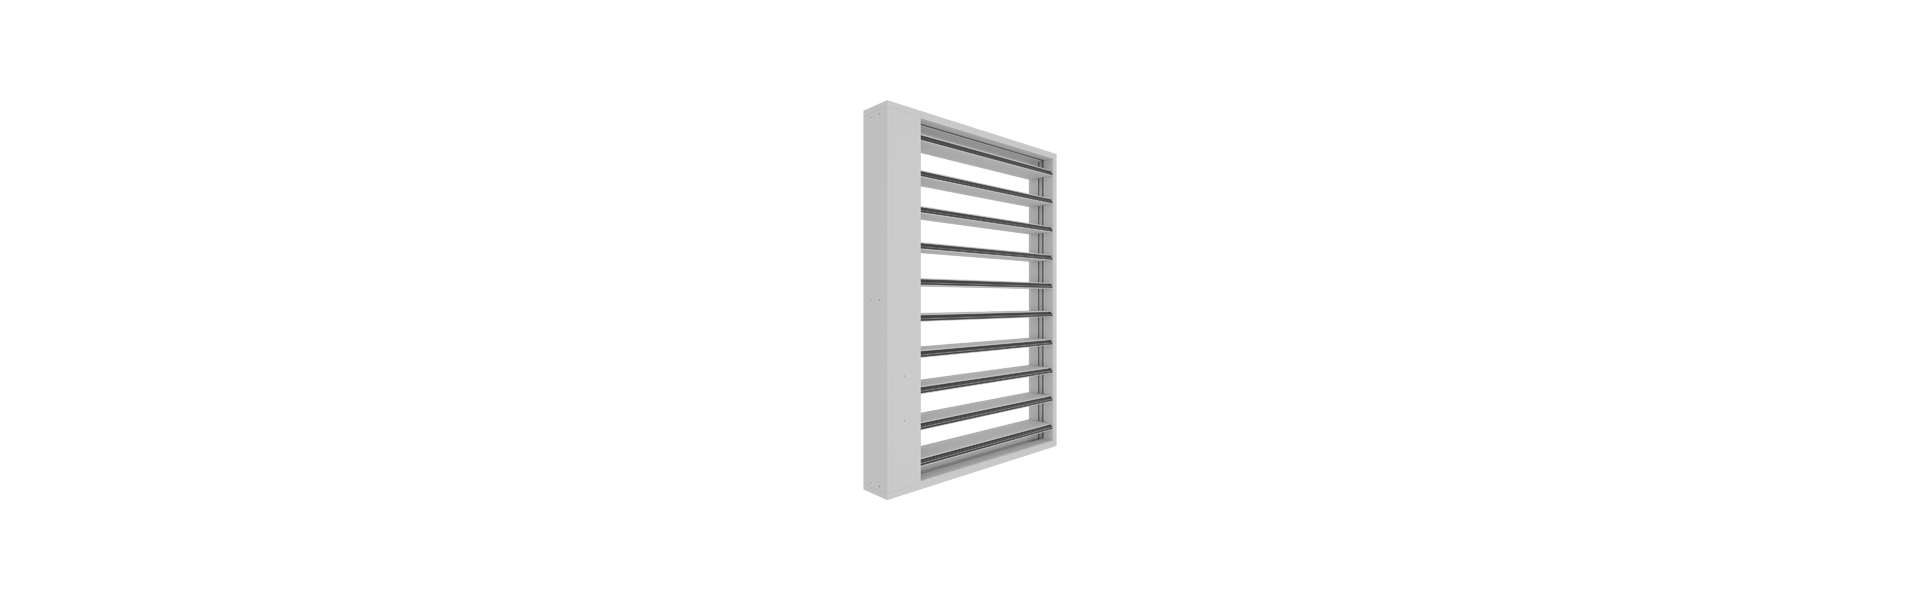 EKM90 multi-blade smoke extraction damper half right from the rear